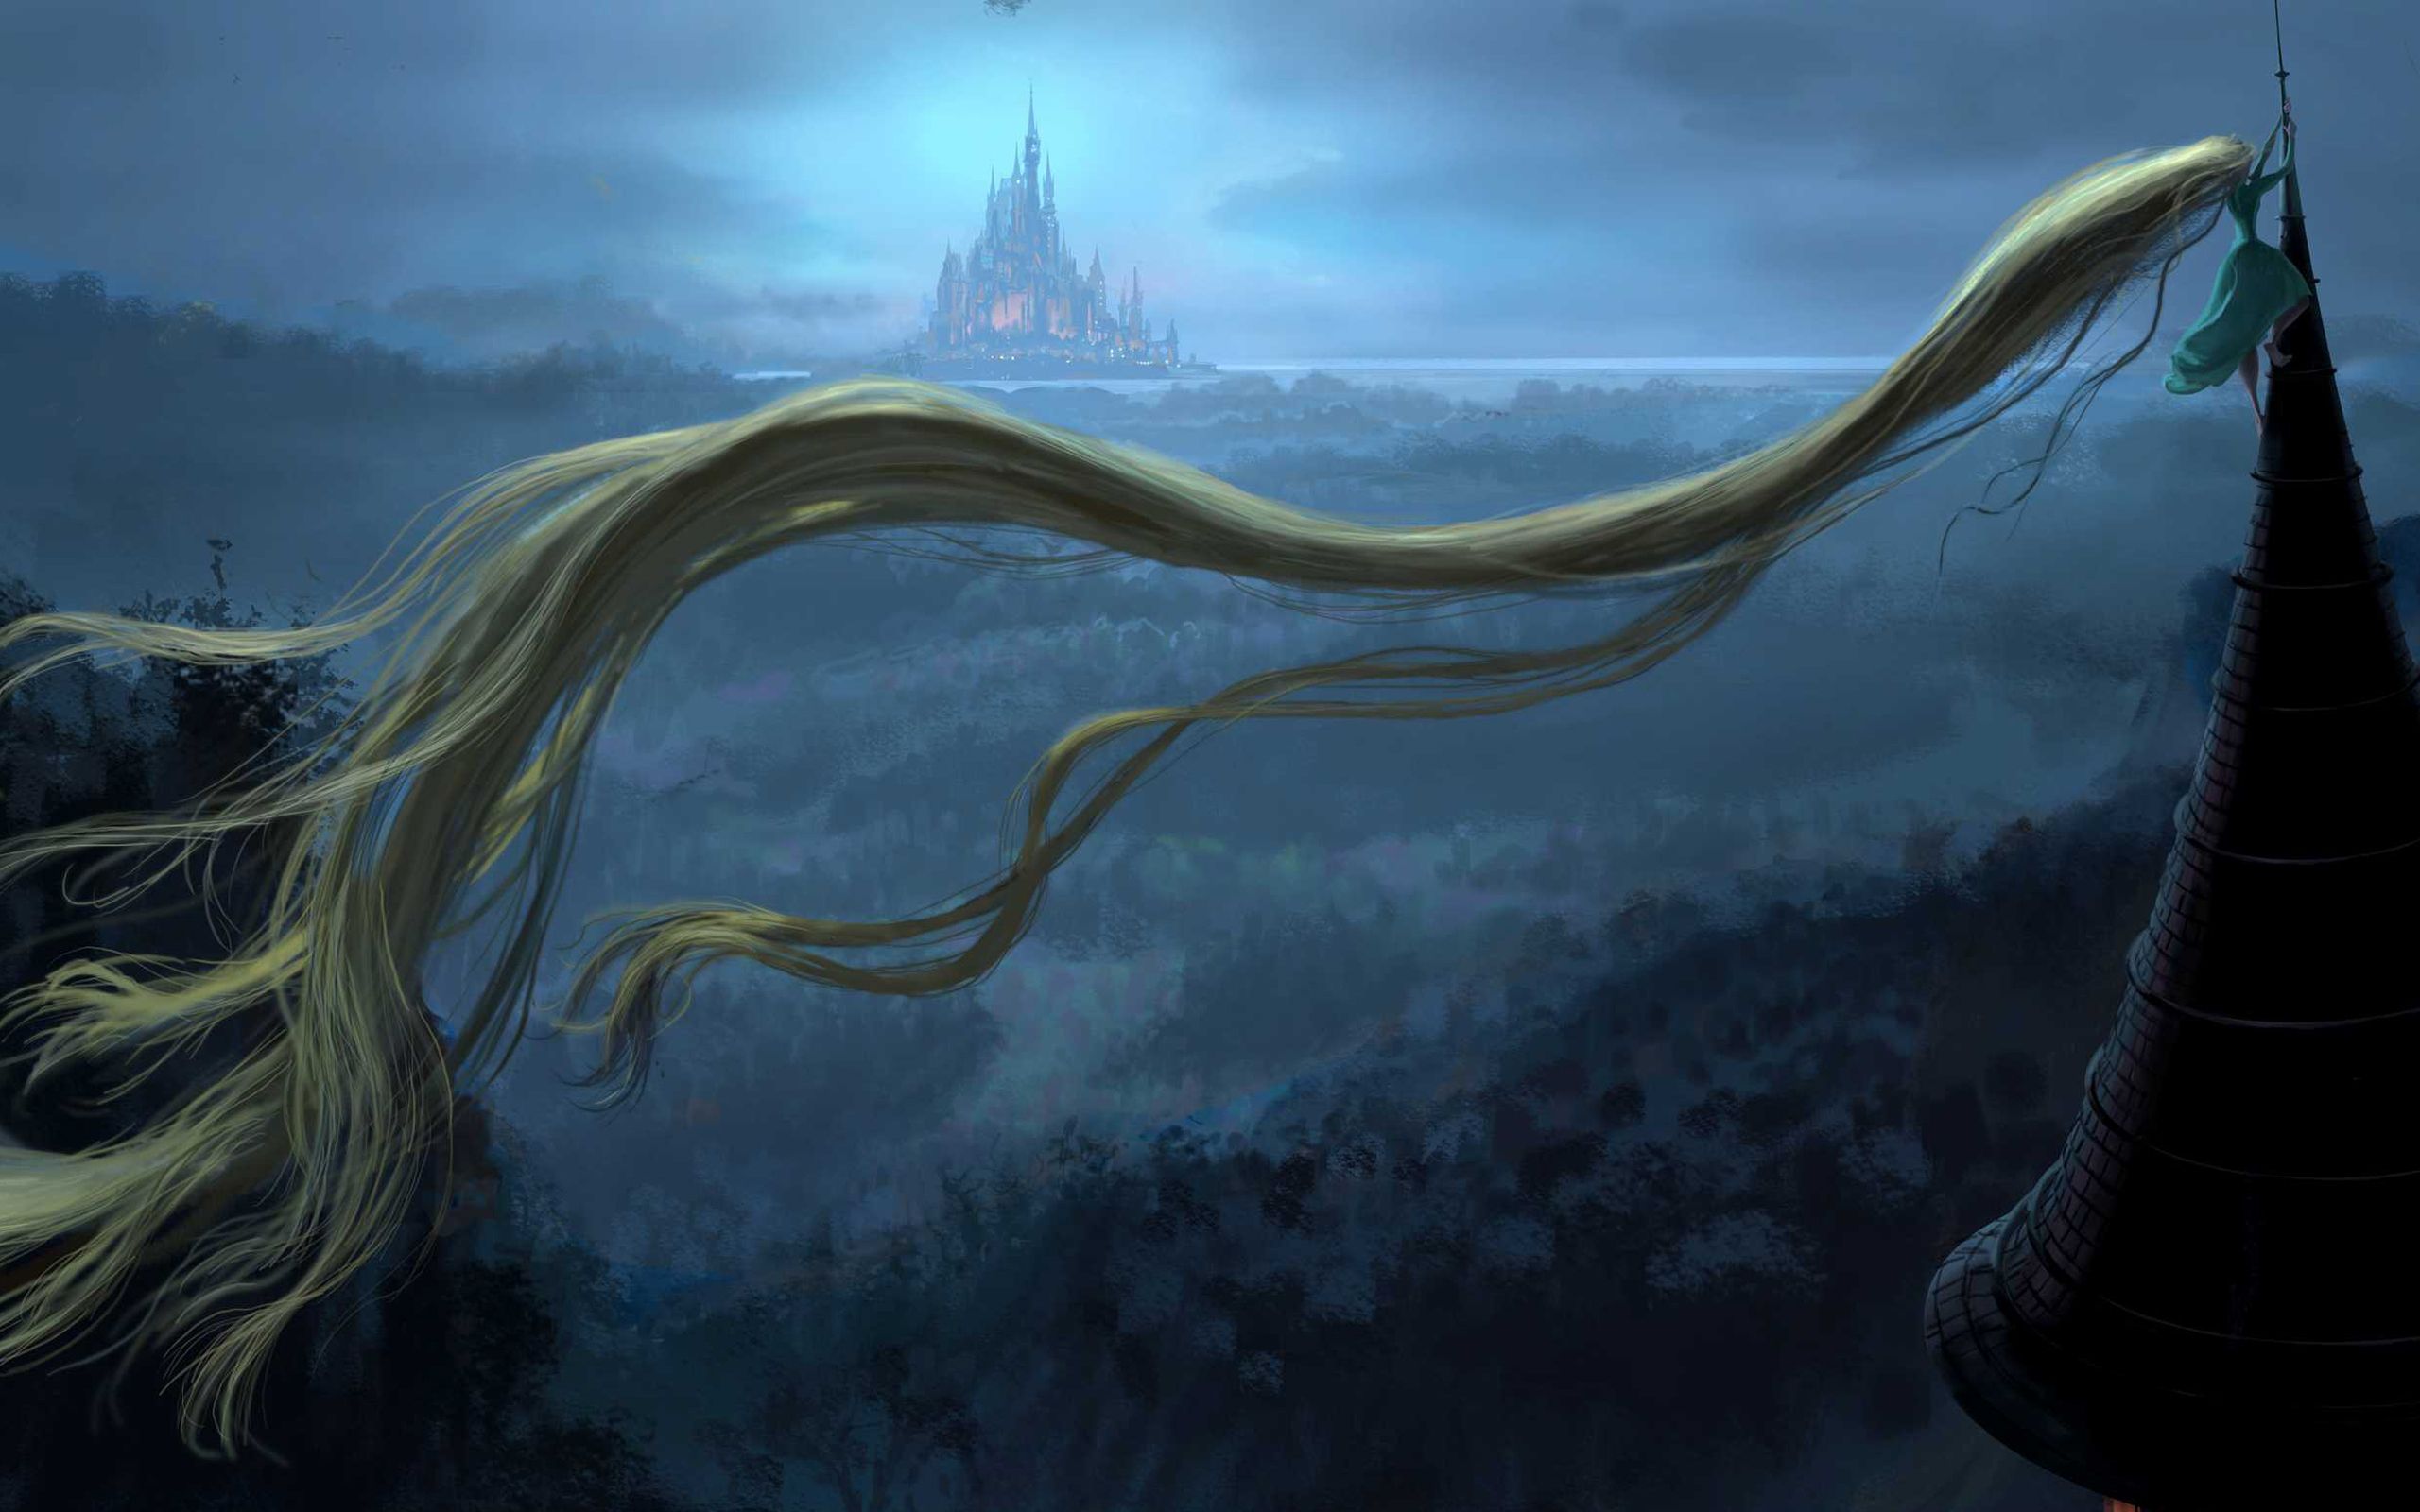 A woman with long hair in front of an old castle - Rapunzel